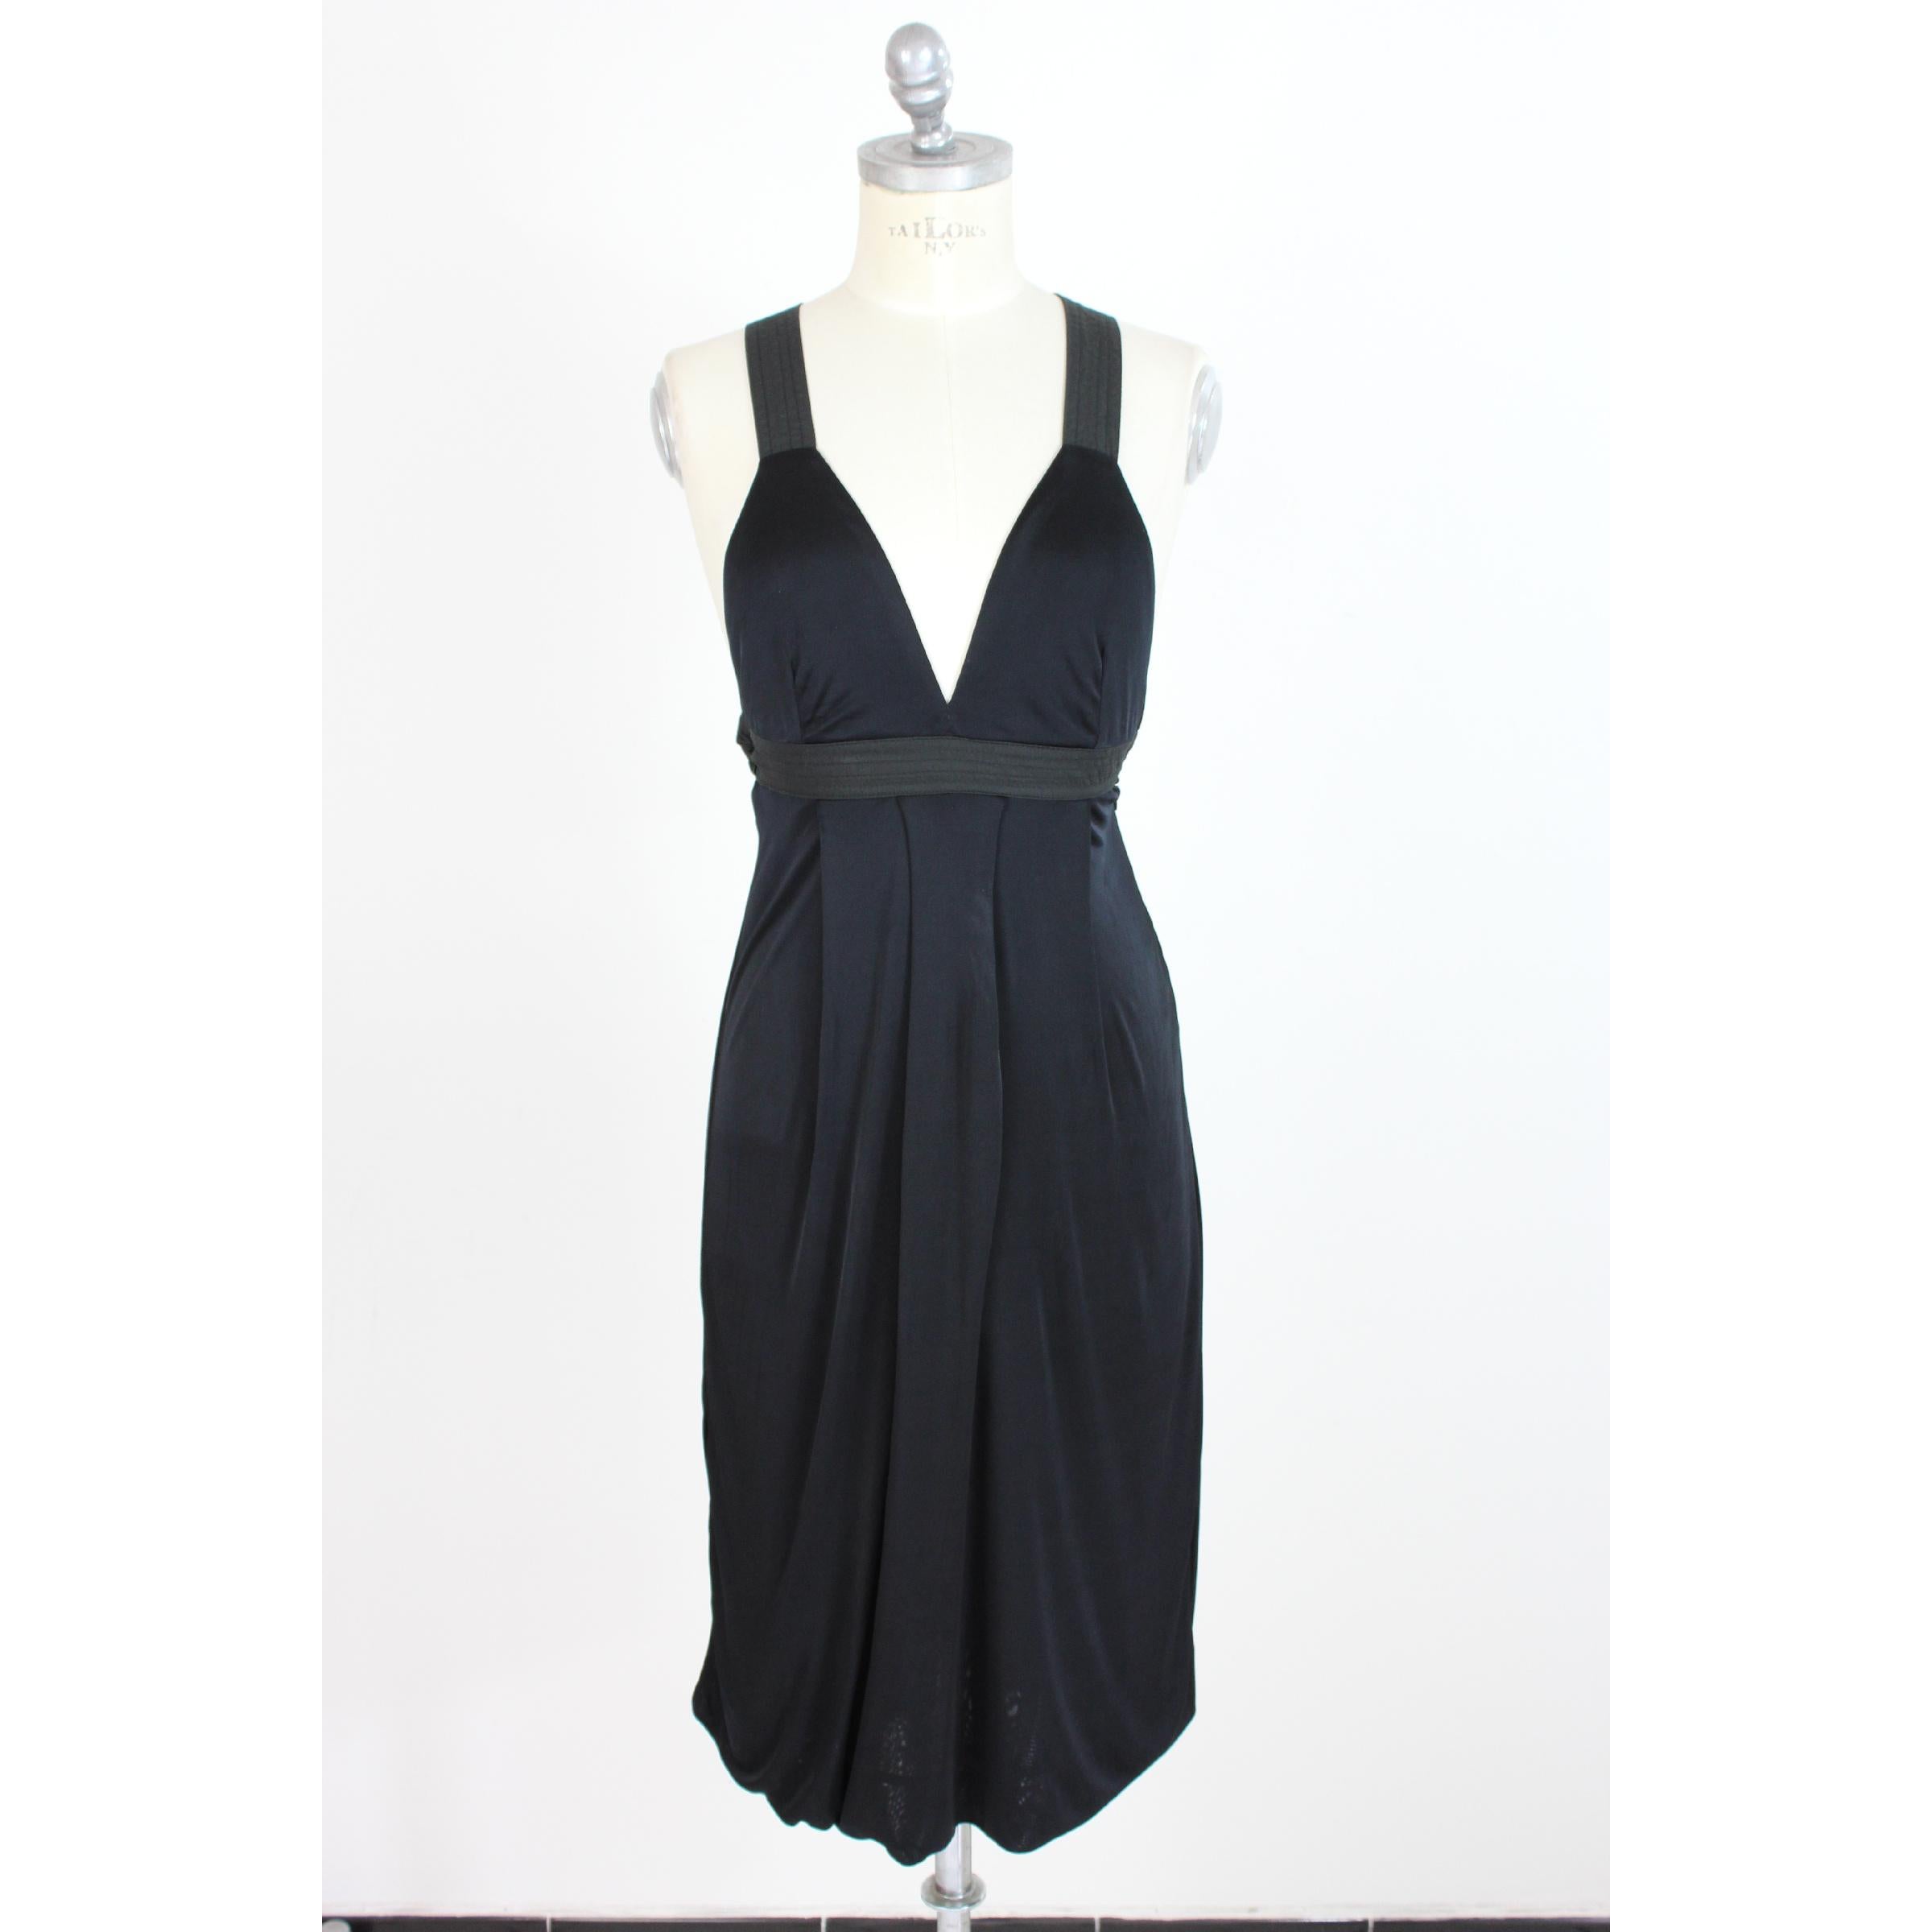 Gianfranco Ferre woman dress, dark blue color, 100% viscose. Soft sheath dress with American collar, adjustable straps. Excellent conditions. Made in Italy.
Size 40 It 6 Us 8 Uk
Shoulder: 40 cm
Bust / Chest: 38 cm
Length: 100 cm